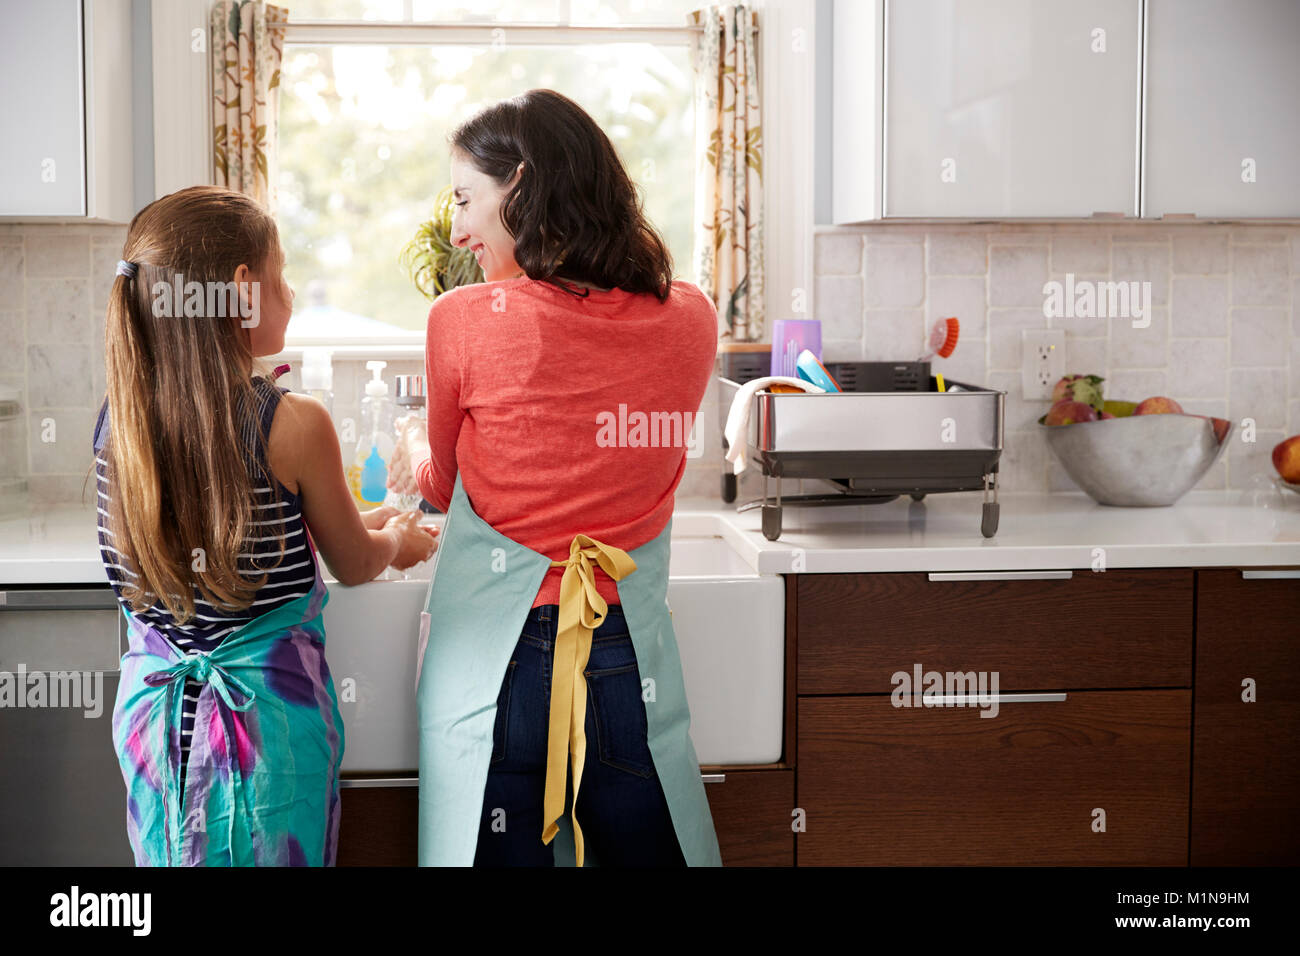 Mum and daughter washing hands at kitchen sink, back view Stock Photo